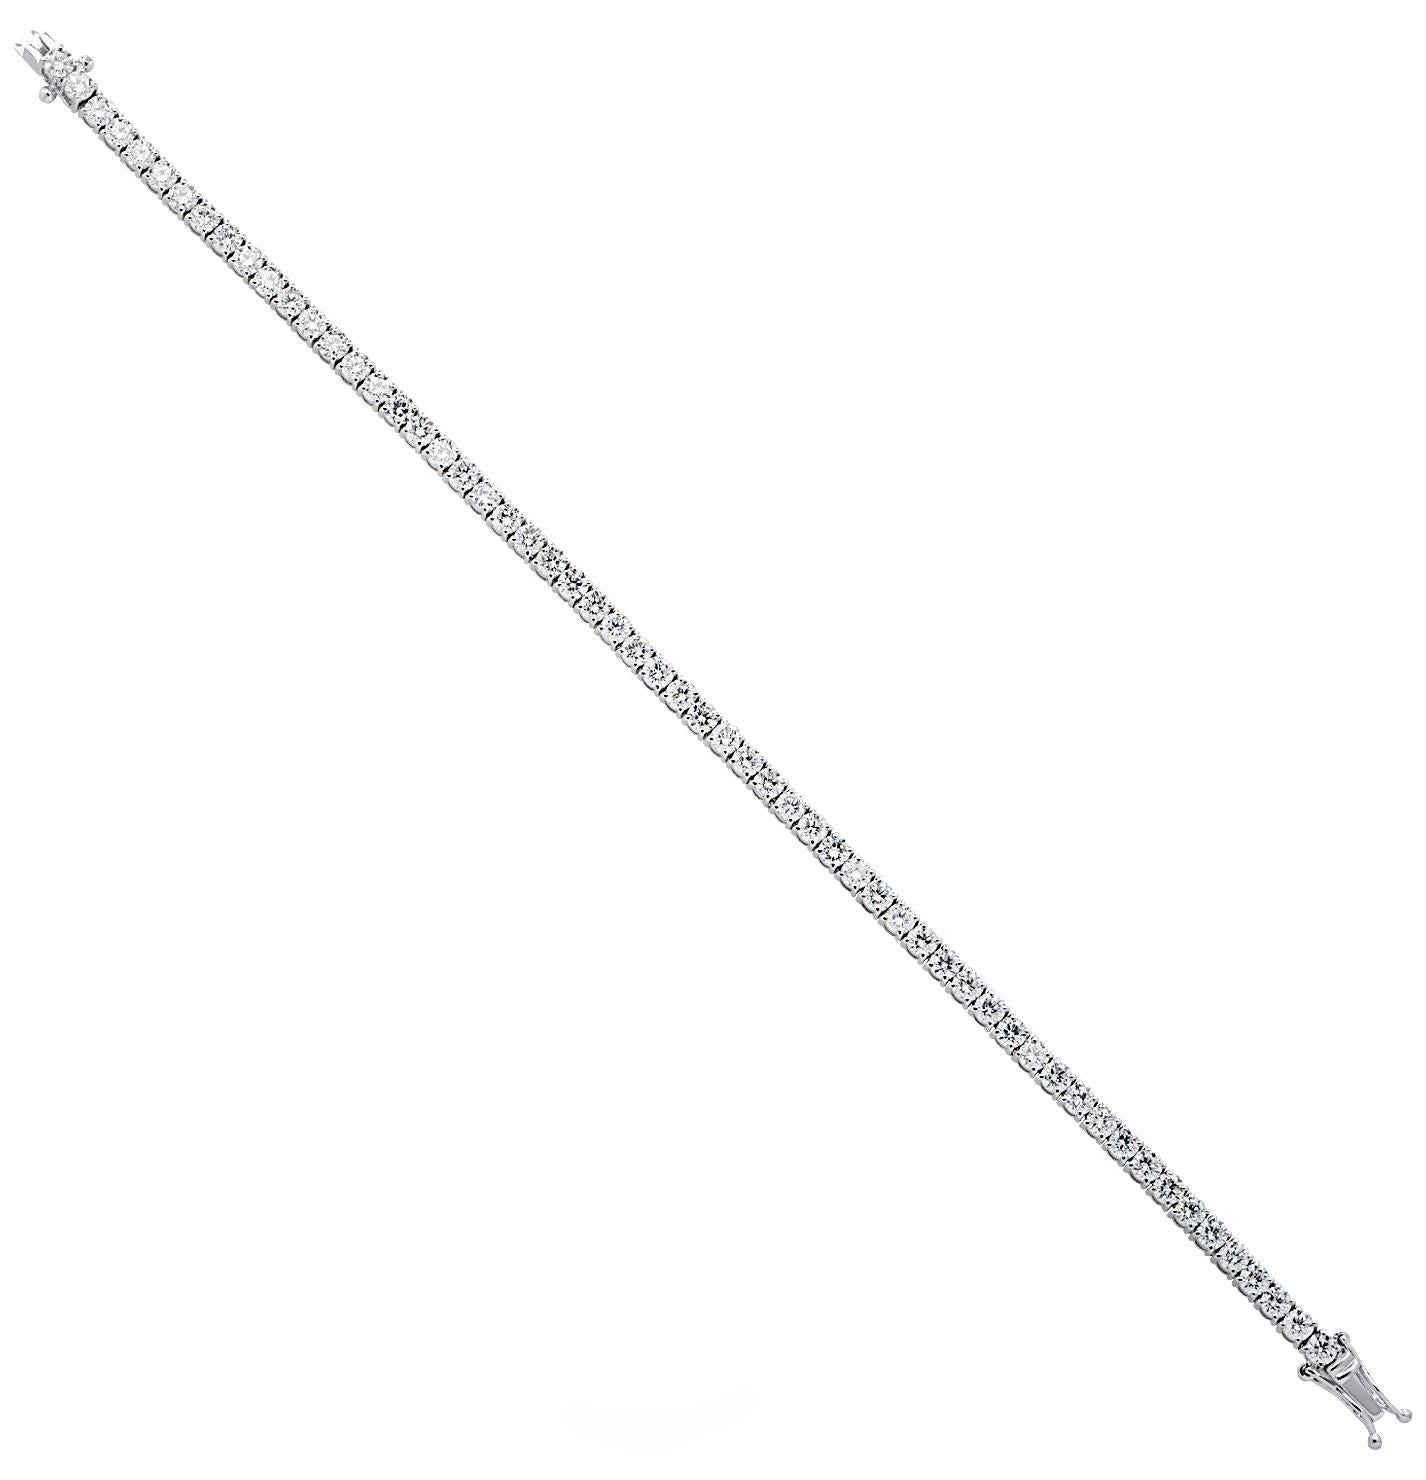 Exquisite Vivid Diamonds diamond tennis bracelet crafted in white gold, showcasing 56 stunning round brilliant cut diamonds weighing approximately 6.10 carats total, G color, SI clarity. Each diamond was carefully selected, perfectly matched and set